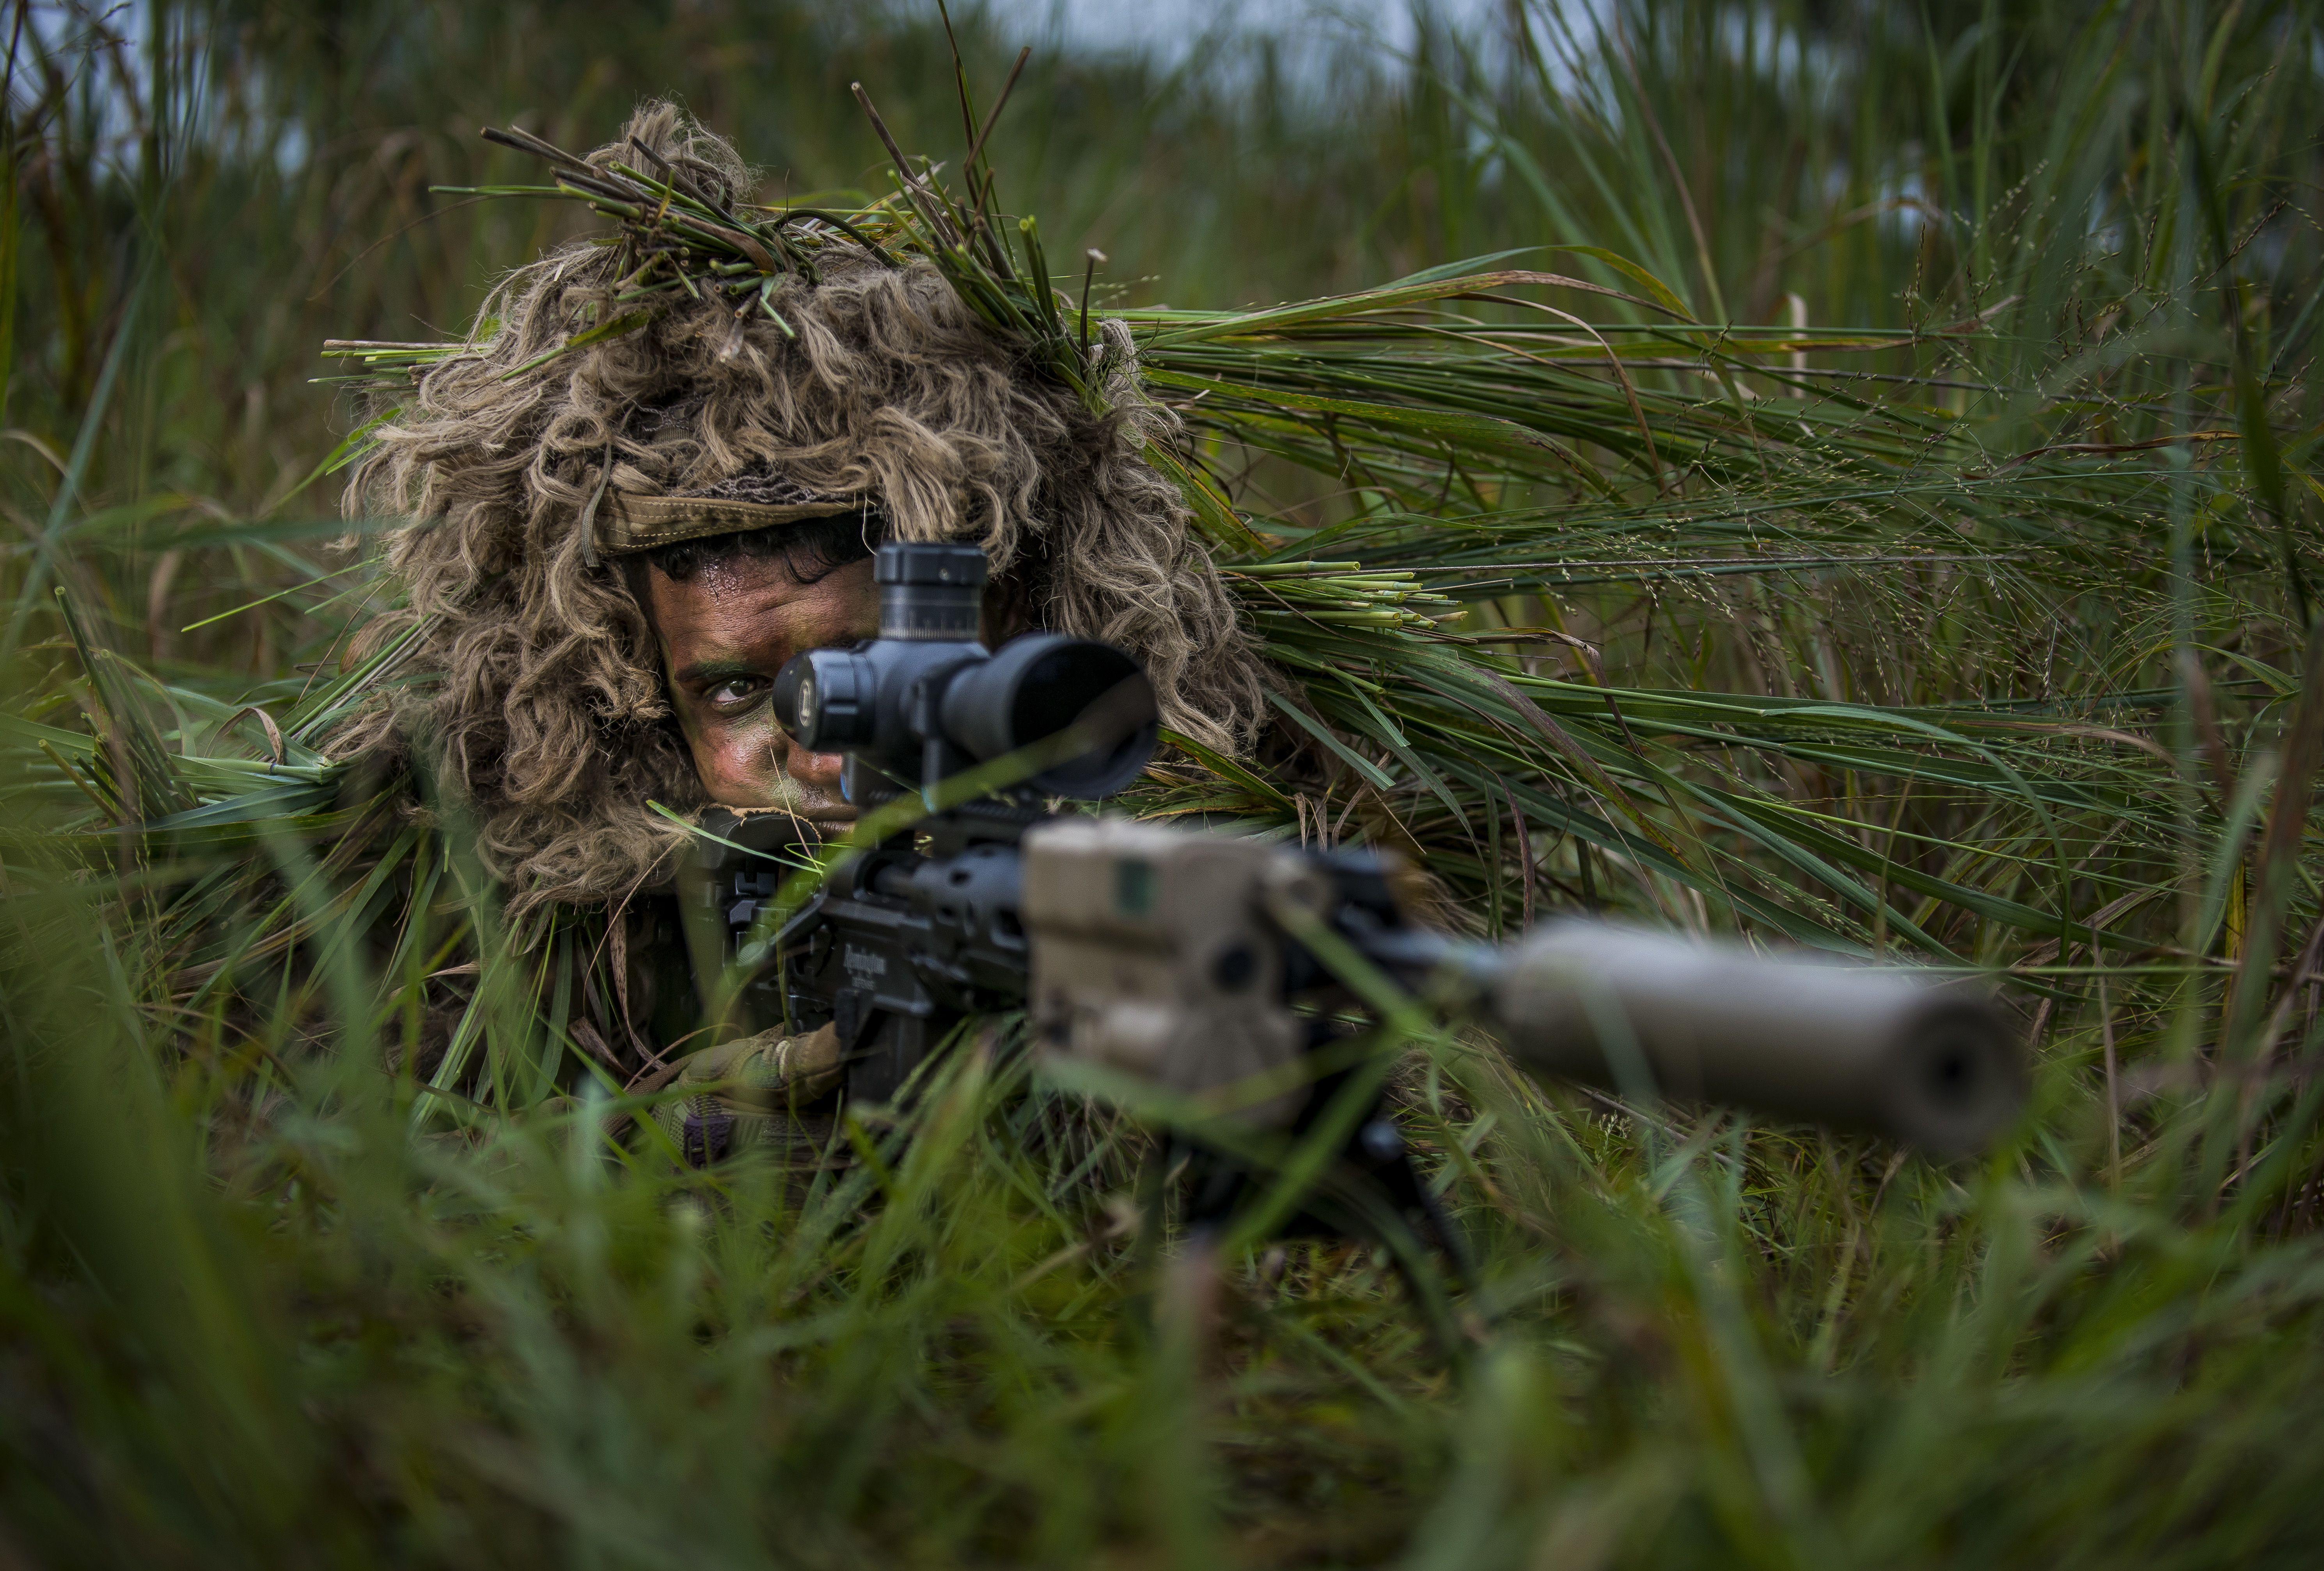 High Sniping Logo - Don't come here unless you are prepared': U.S. Army Sniper School